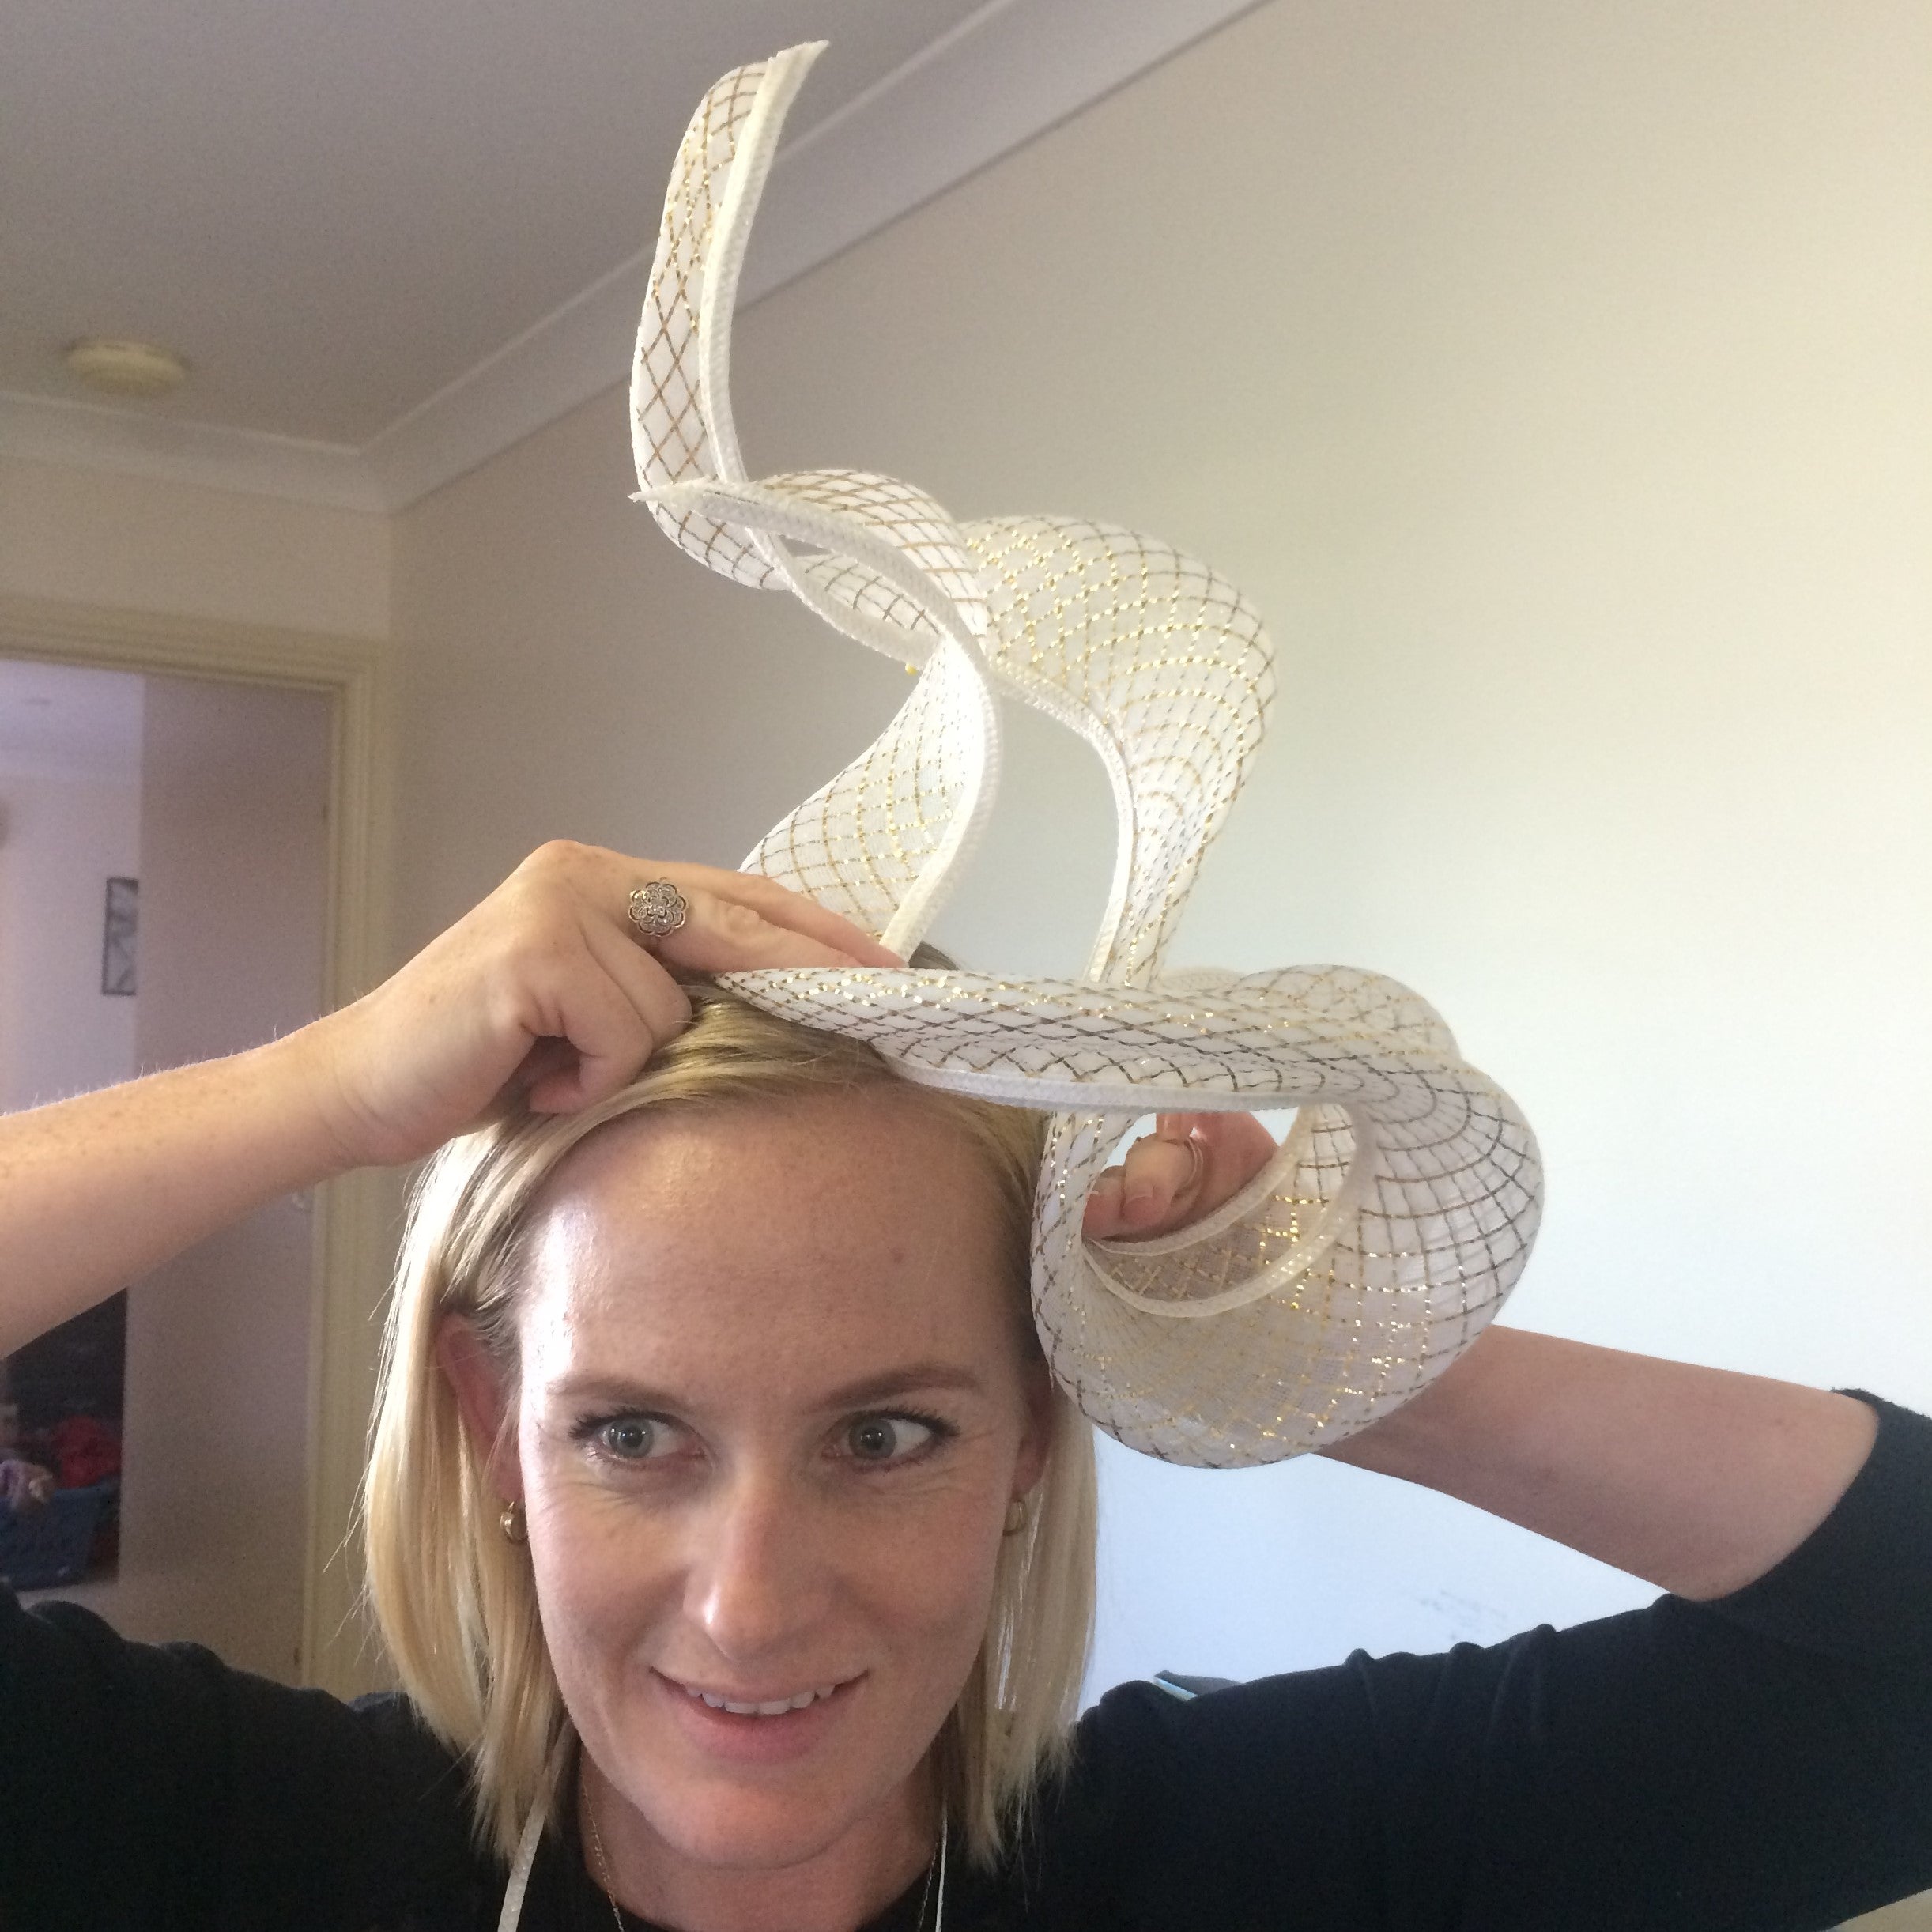 White Swirl Hat being tried on and fitted